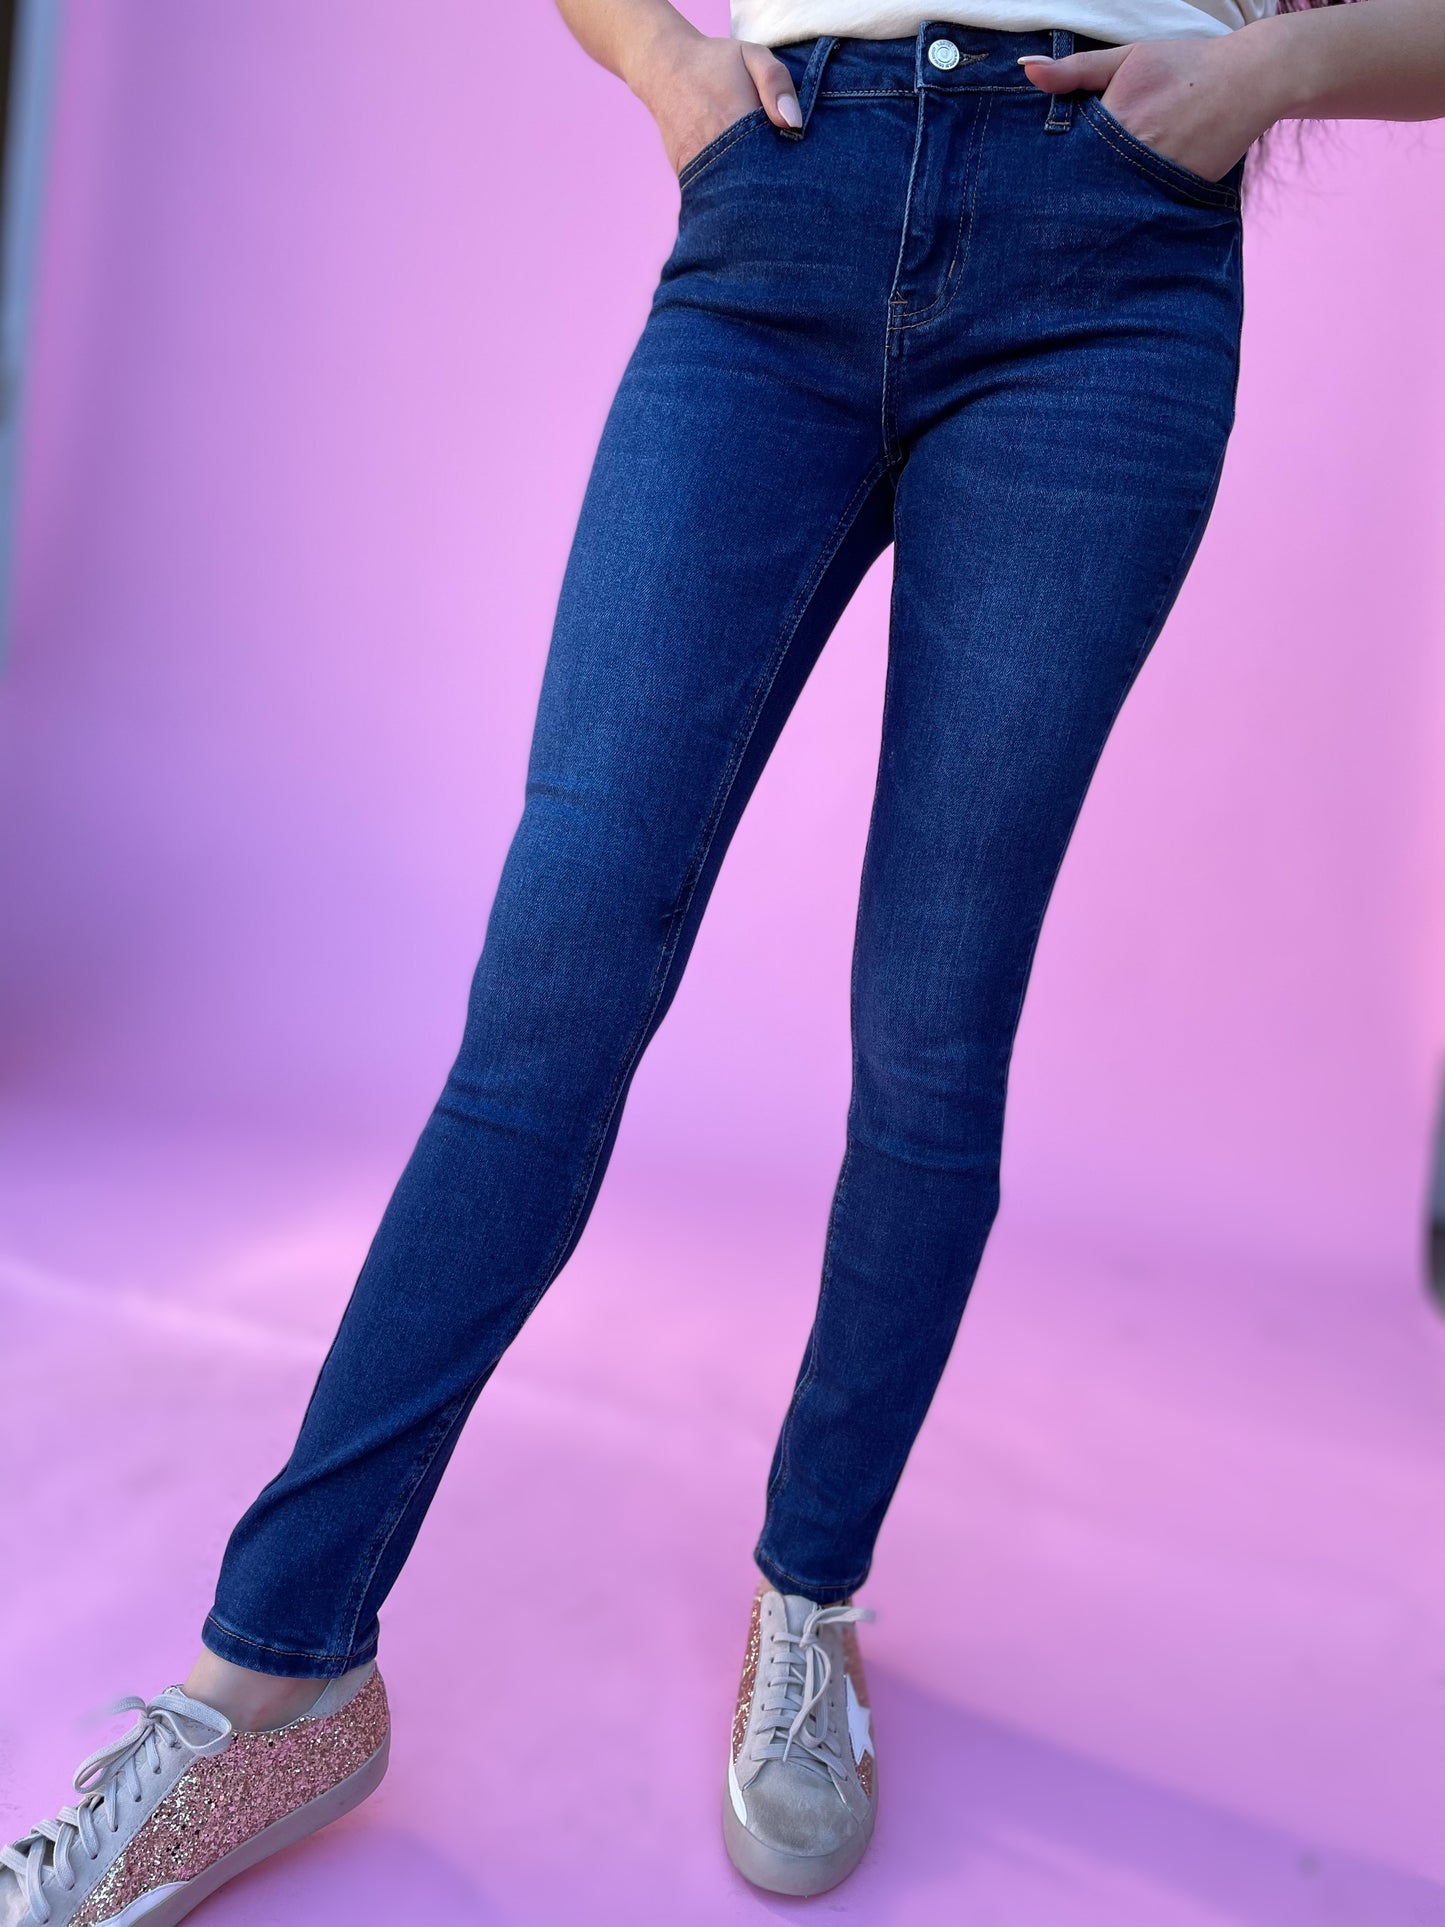 Load image into Gallery viewer, Dark Wash Non Distressed High Rise Skinny Jeans*FINAL SALE*
